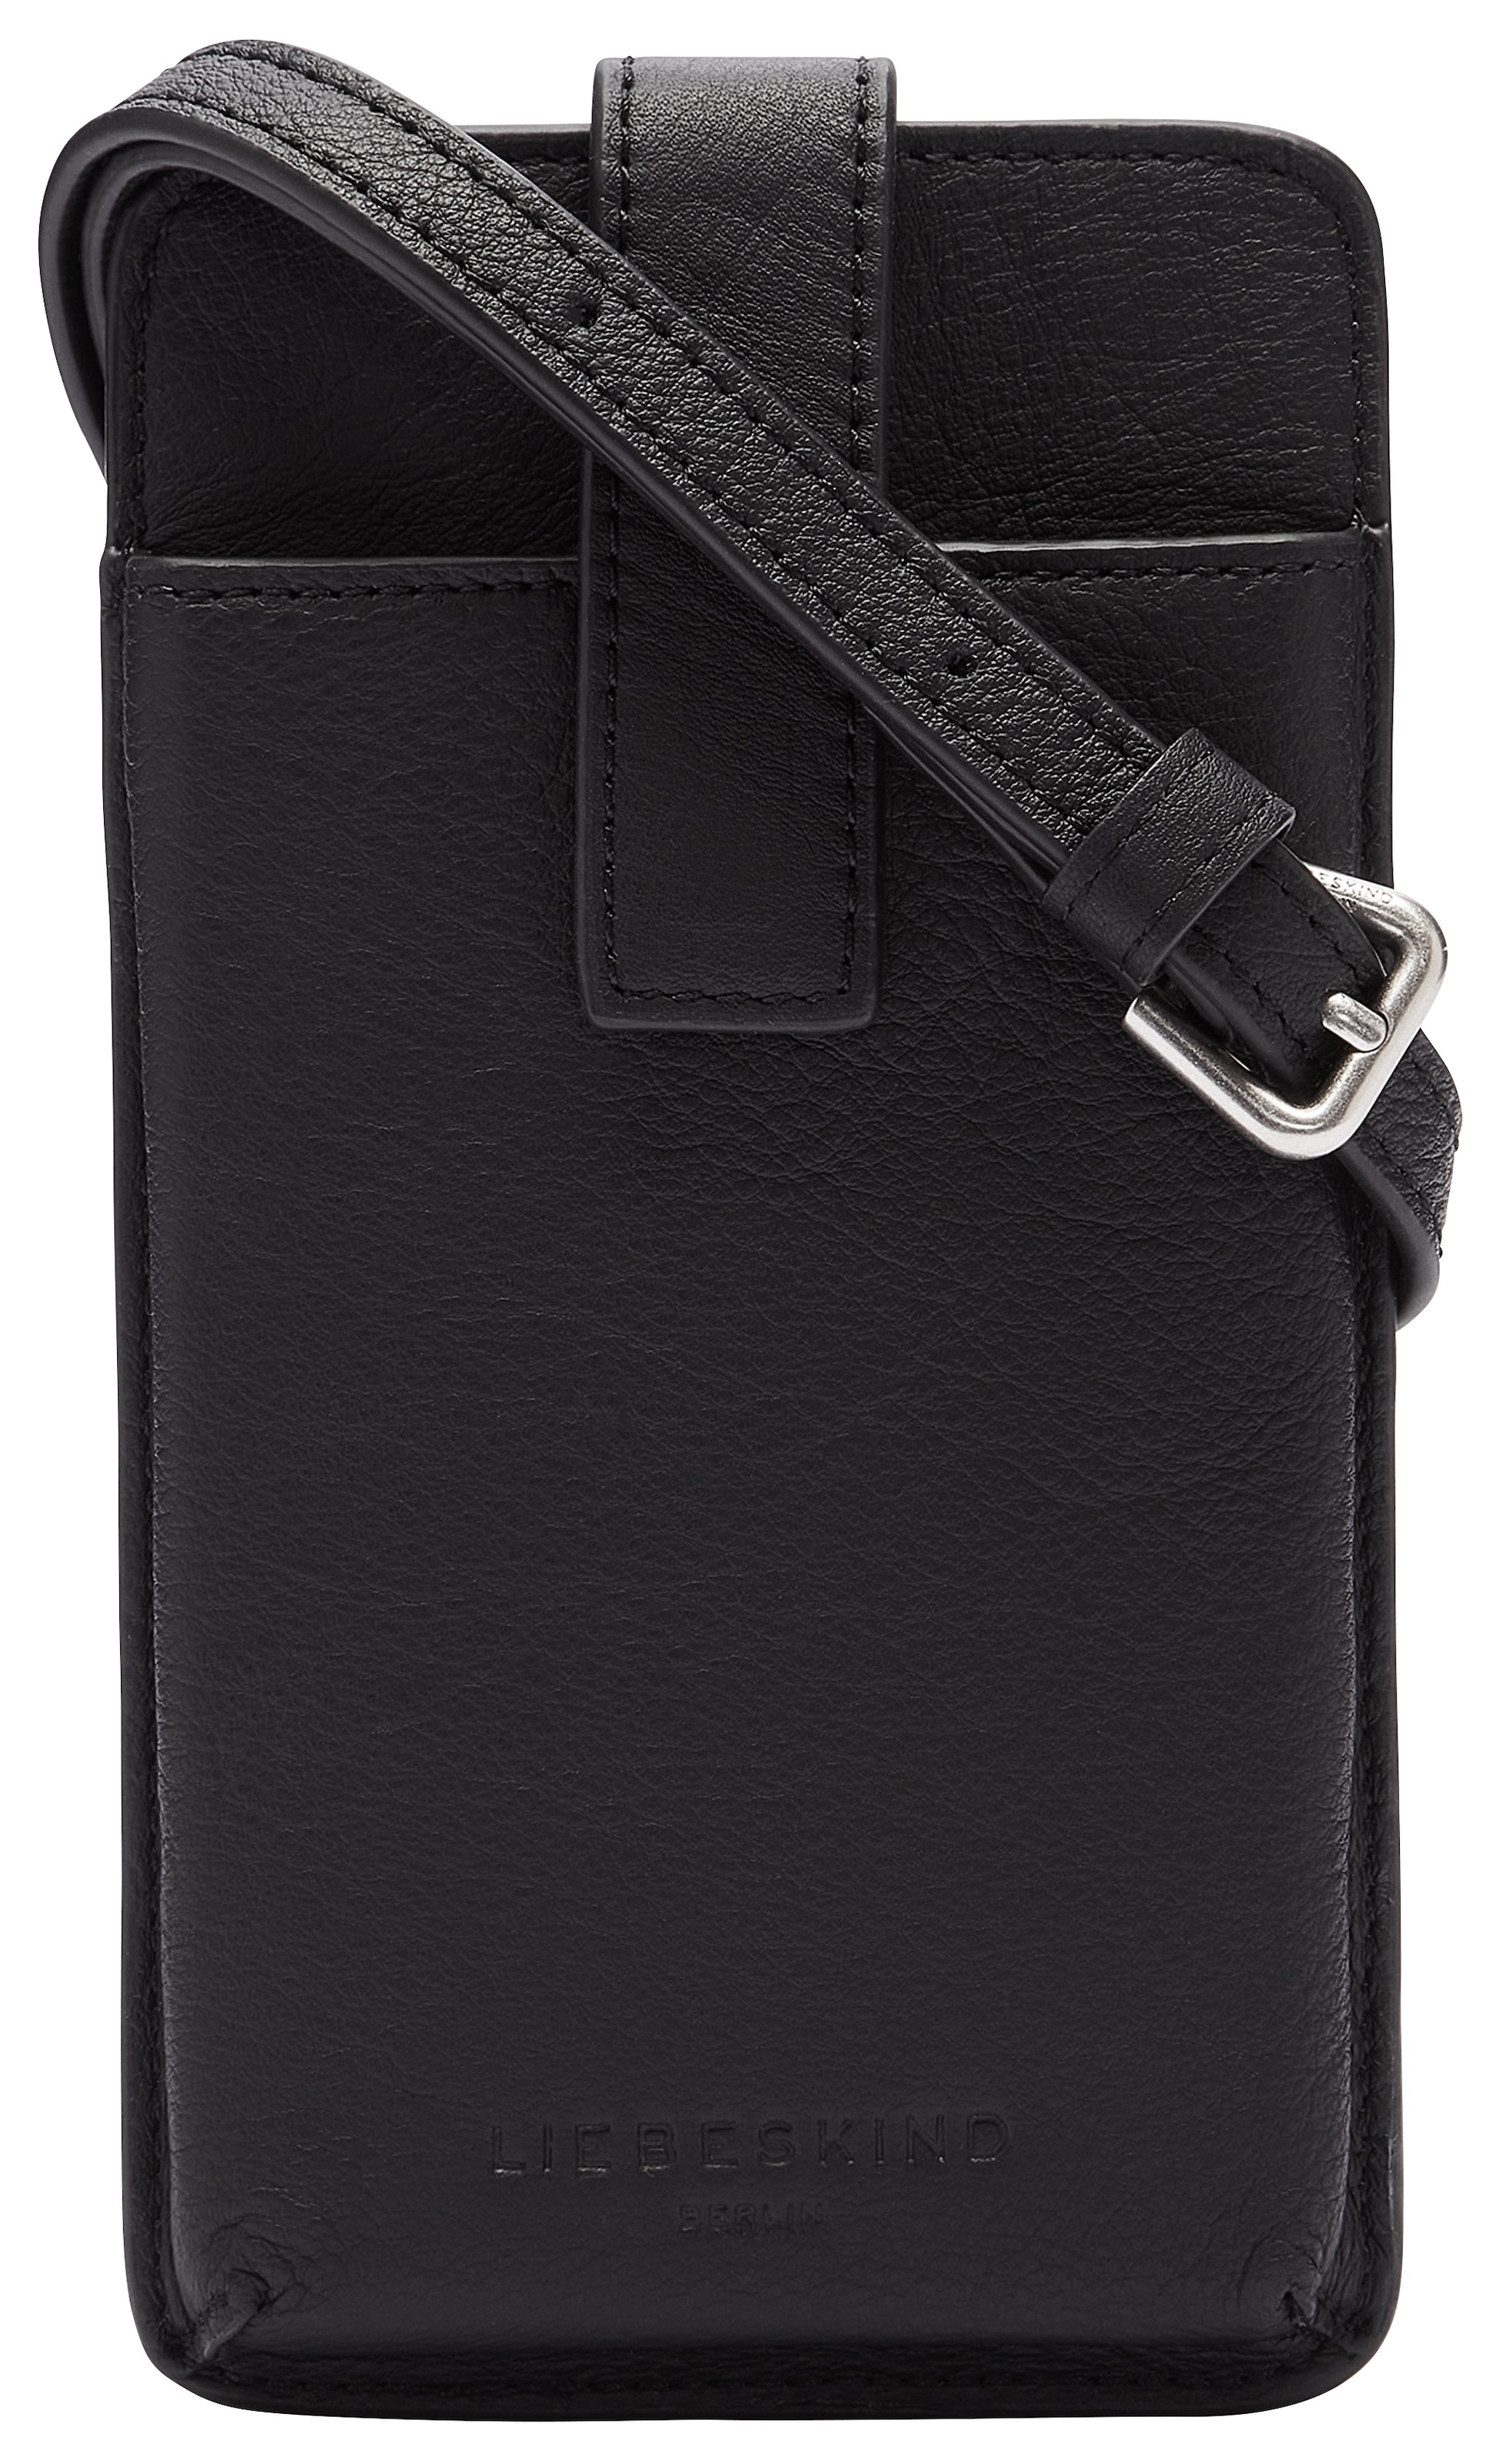 Handytasche »MOBILE POUCH HARRIS Mobile Pouch«, Zertifiziert nach Leather Working Group